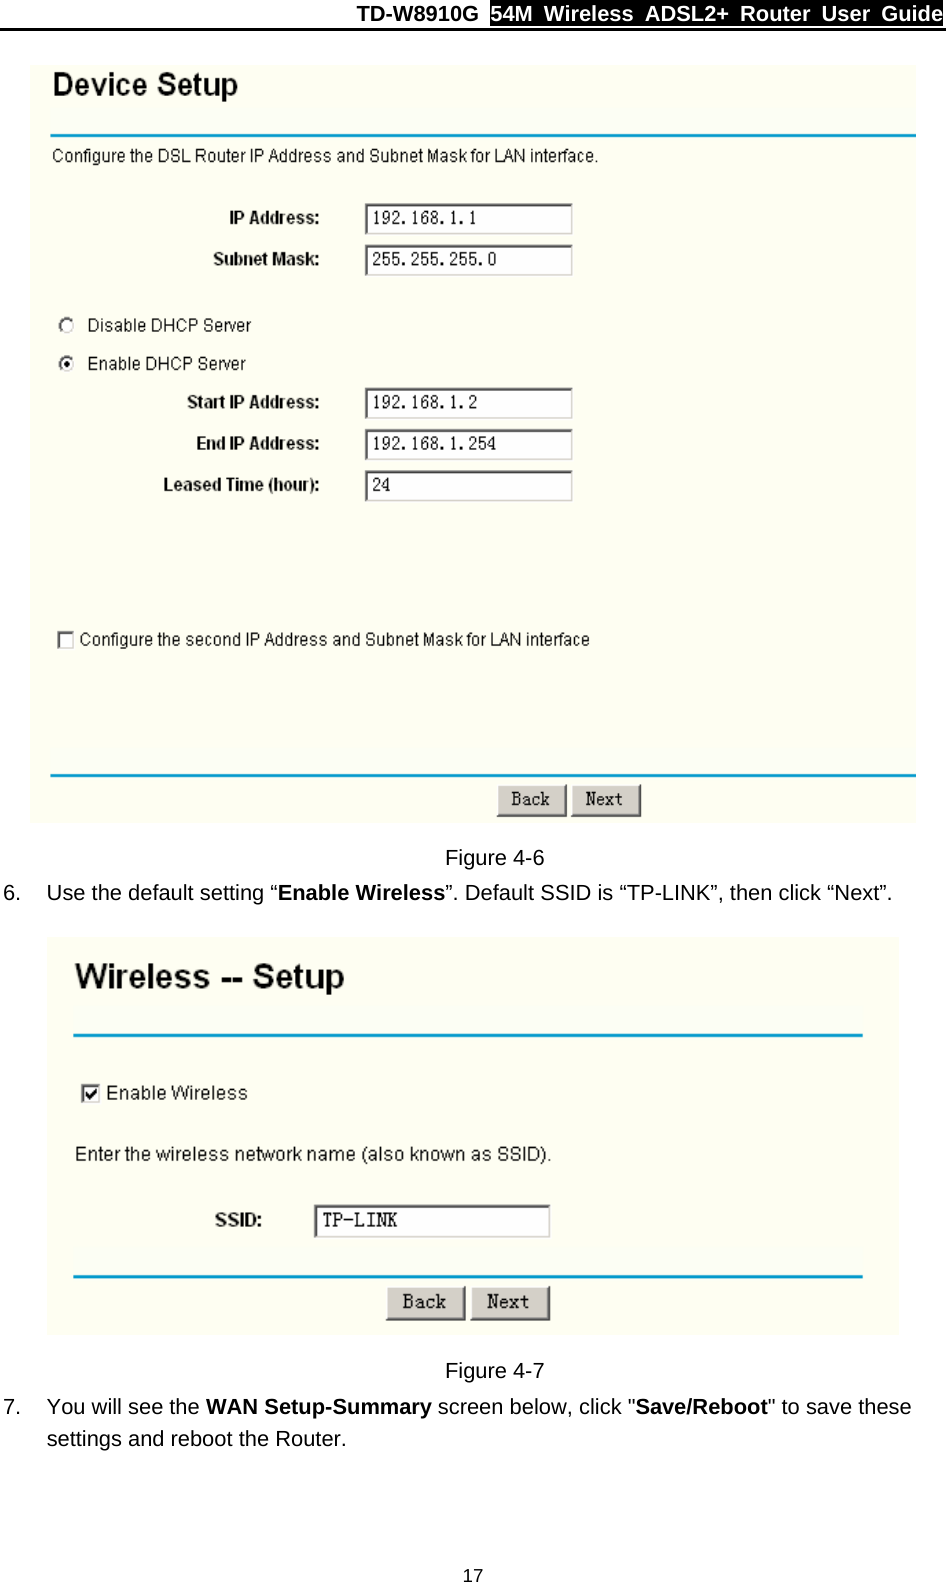 TD-W8910G  54M Wireless ADSL2+ Router User Guide  17 Figure 4-6 6.  Use the default setting “Enable Wireless”. Default SSID is “TP-LINK”, then click “Next”.  Figure 4-7 7.  You will see the WAN Setup-Summary screen below, click &quot;Save/Reboot&quot; to save these settings and reboot the Router. 